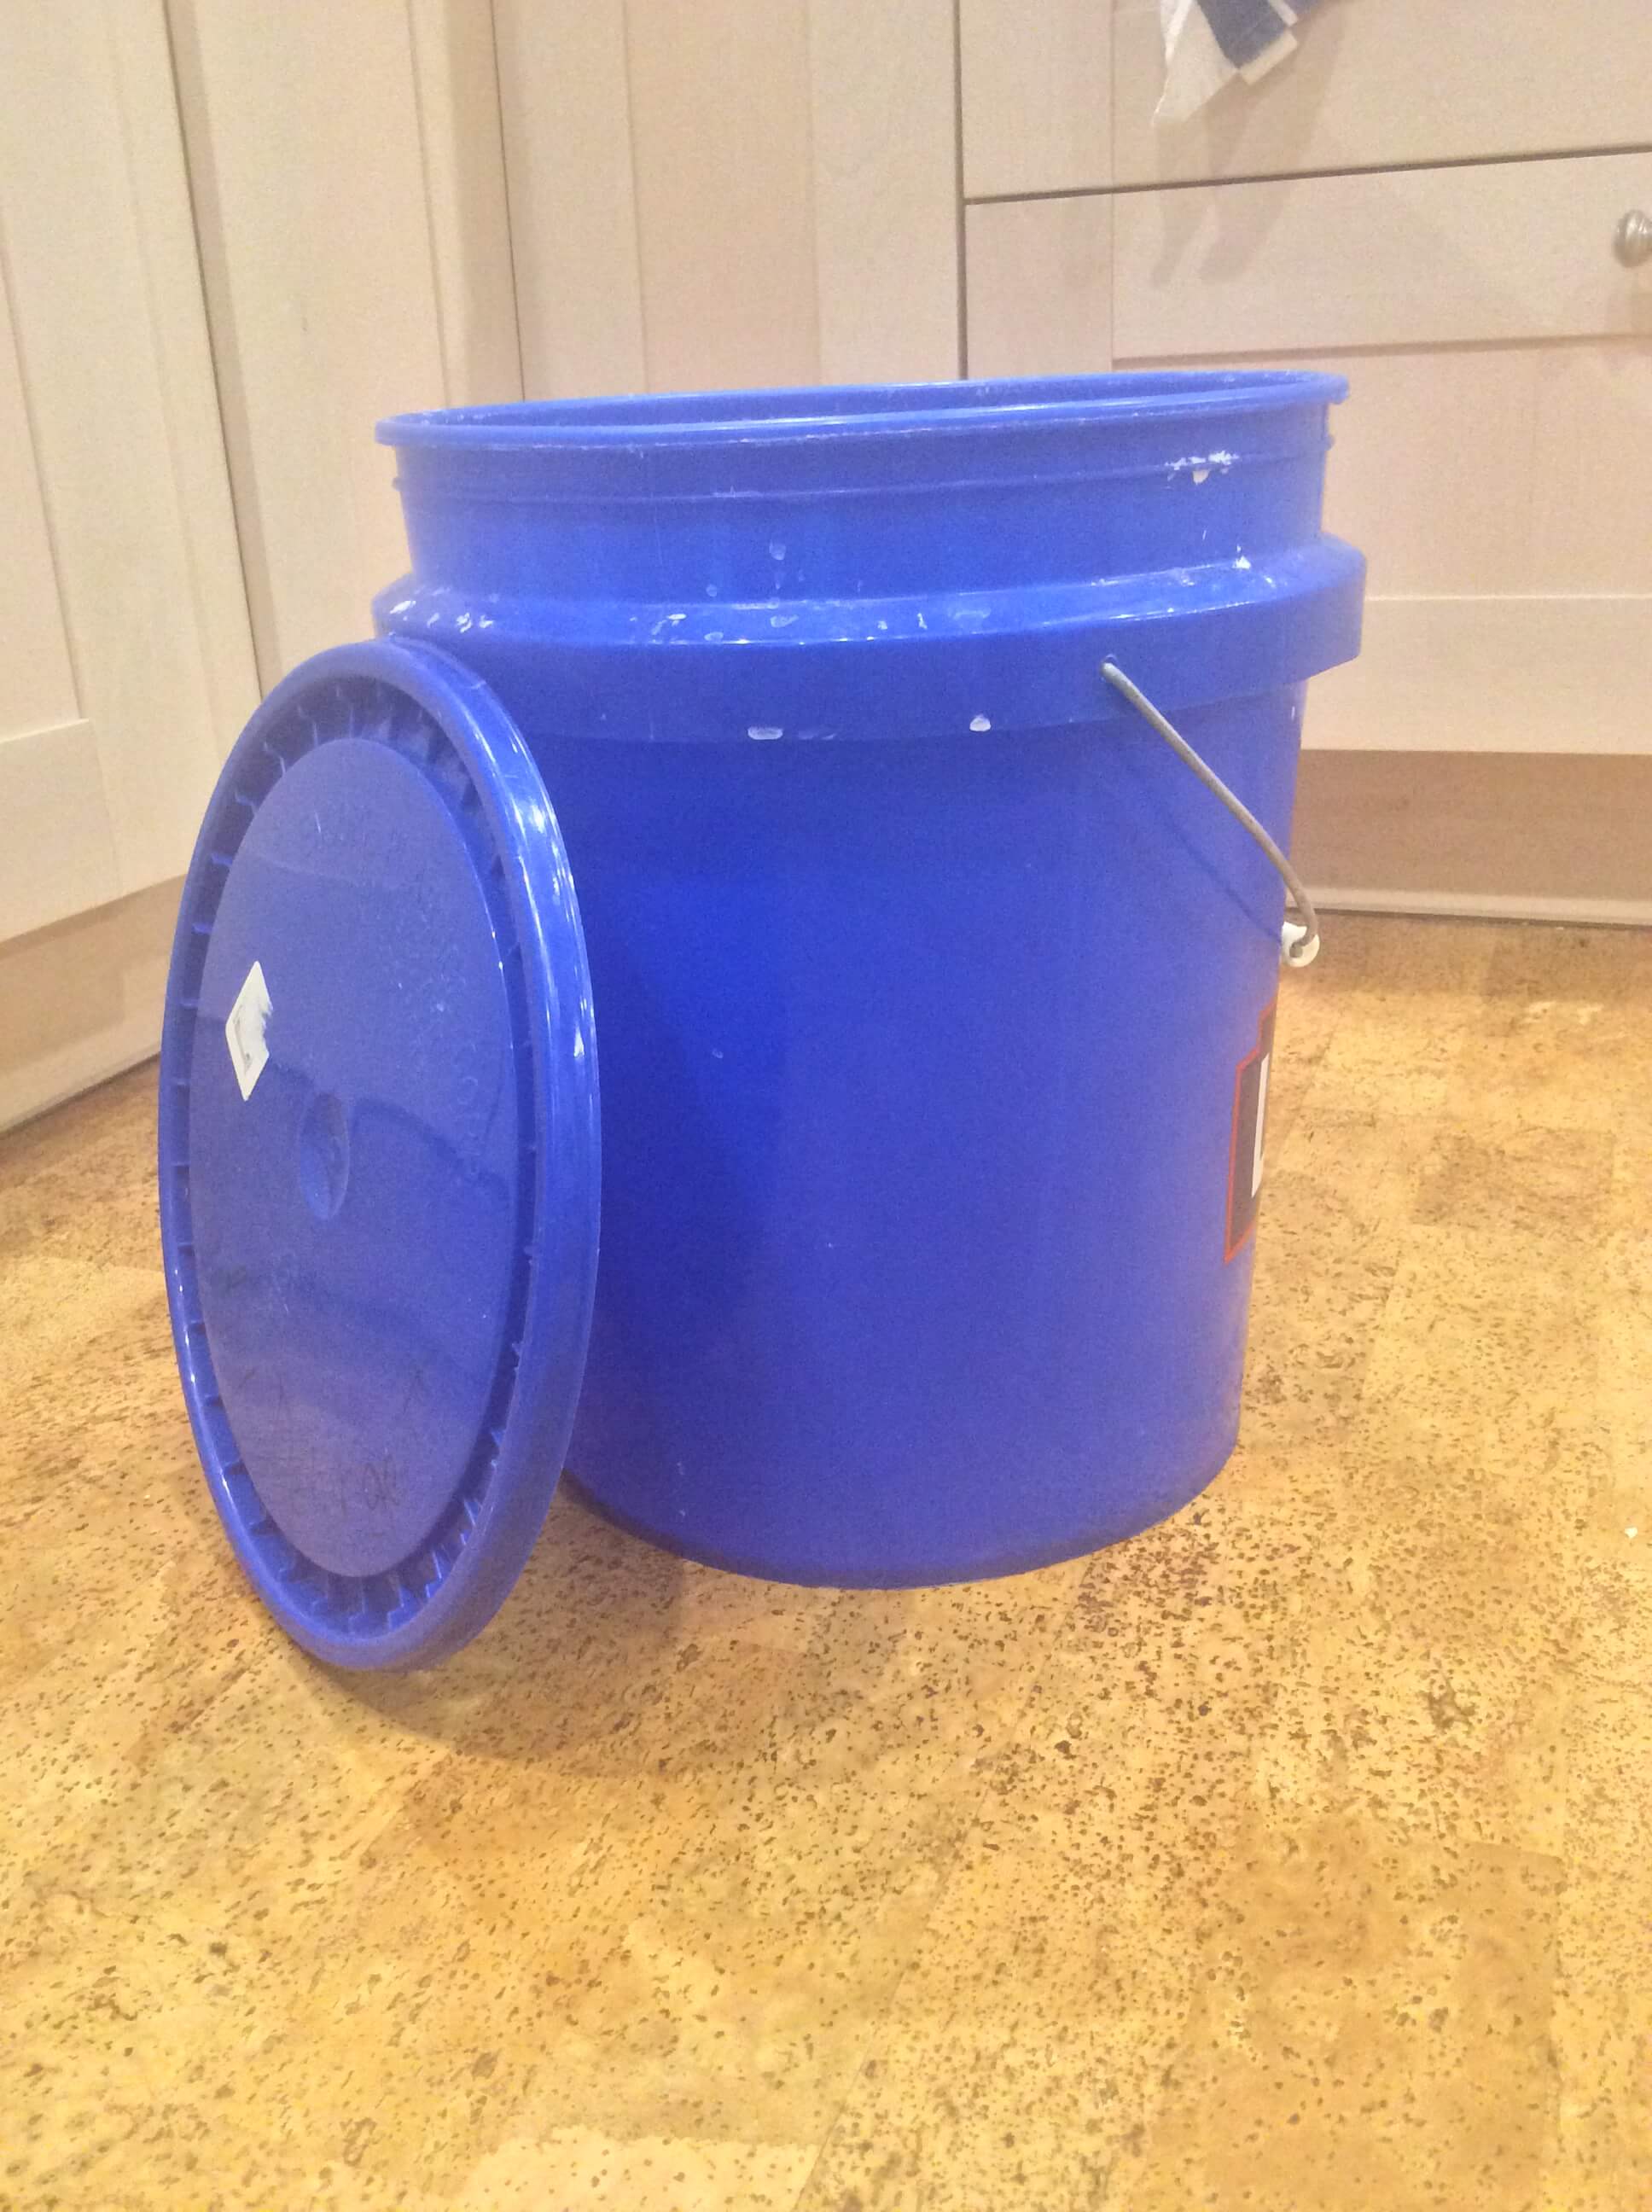 Fill the 5 gallon bucket up about halfway with hot water from the 